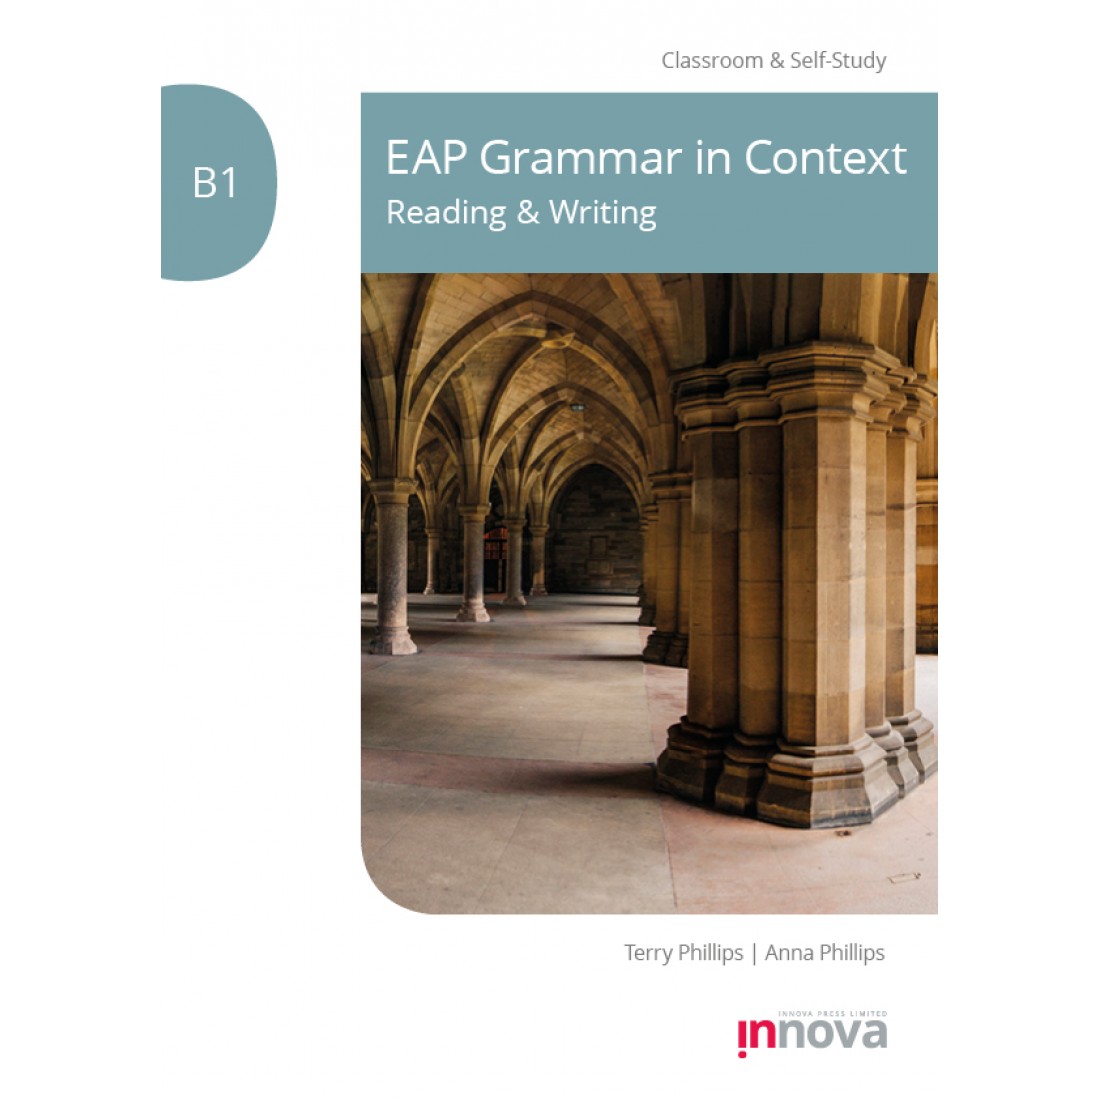 –　Grammar　EAP　book　B1　Context:　in　Writing　Reading　Student's